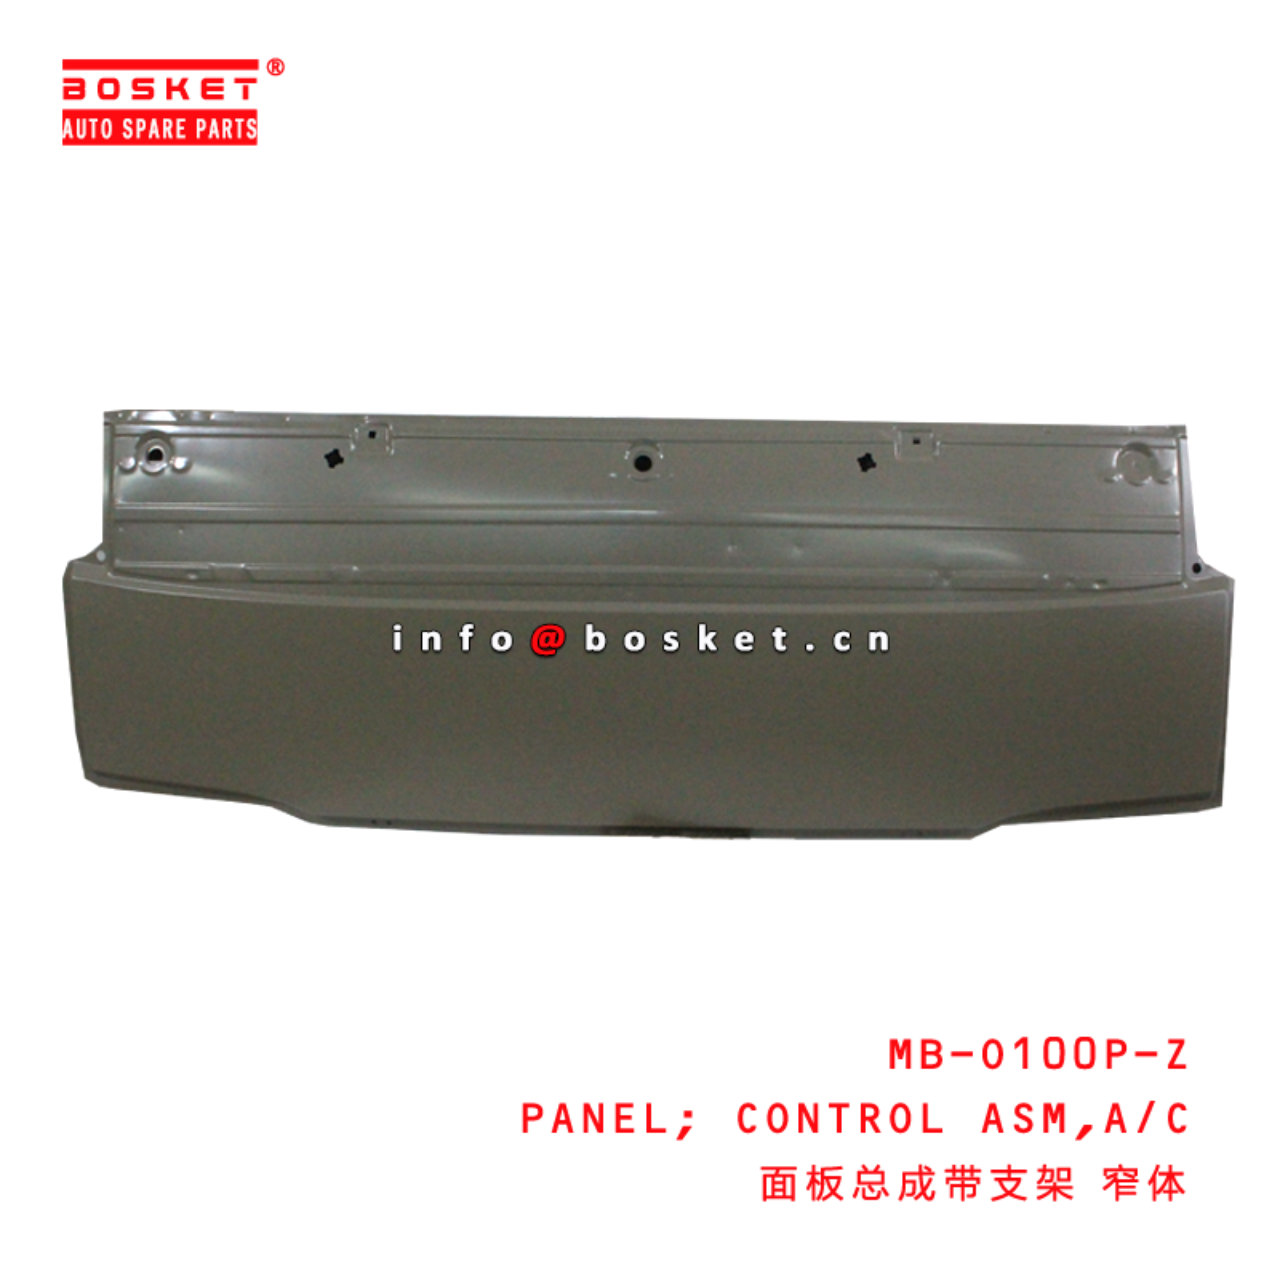 MB-O100P-Z Air Compression CONTROL Assembly PANEL suitable for ISUZU 100P老款 MB-O100P-Z